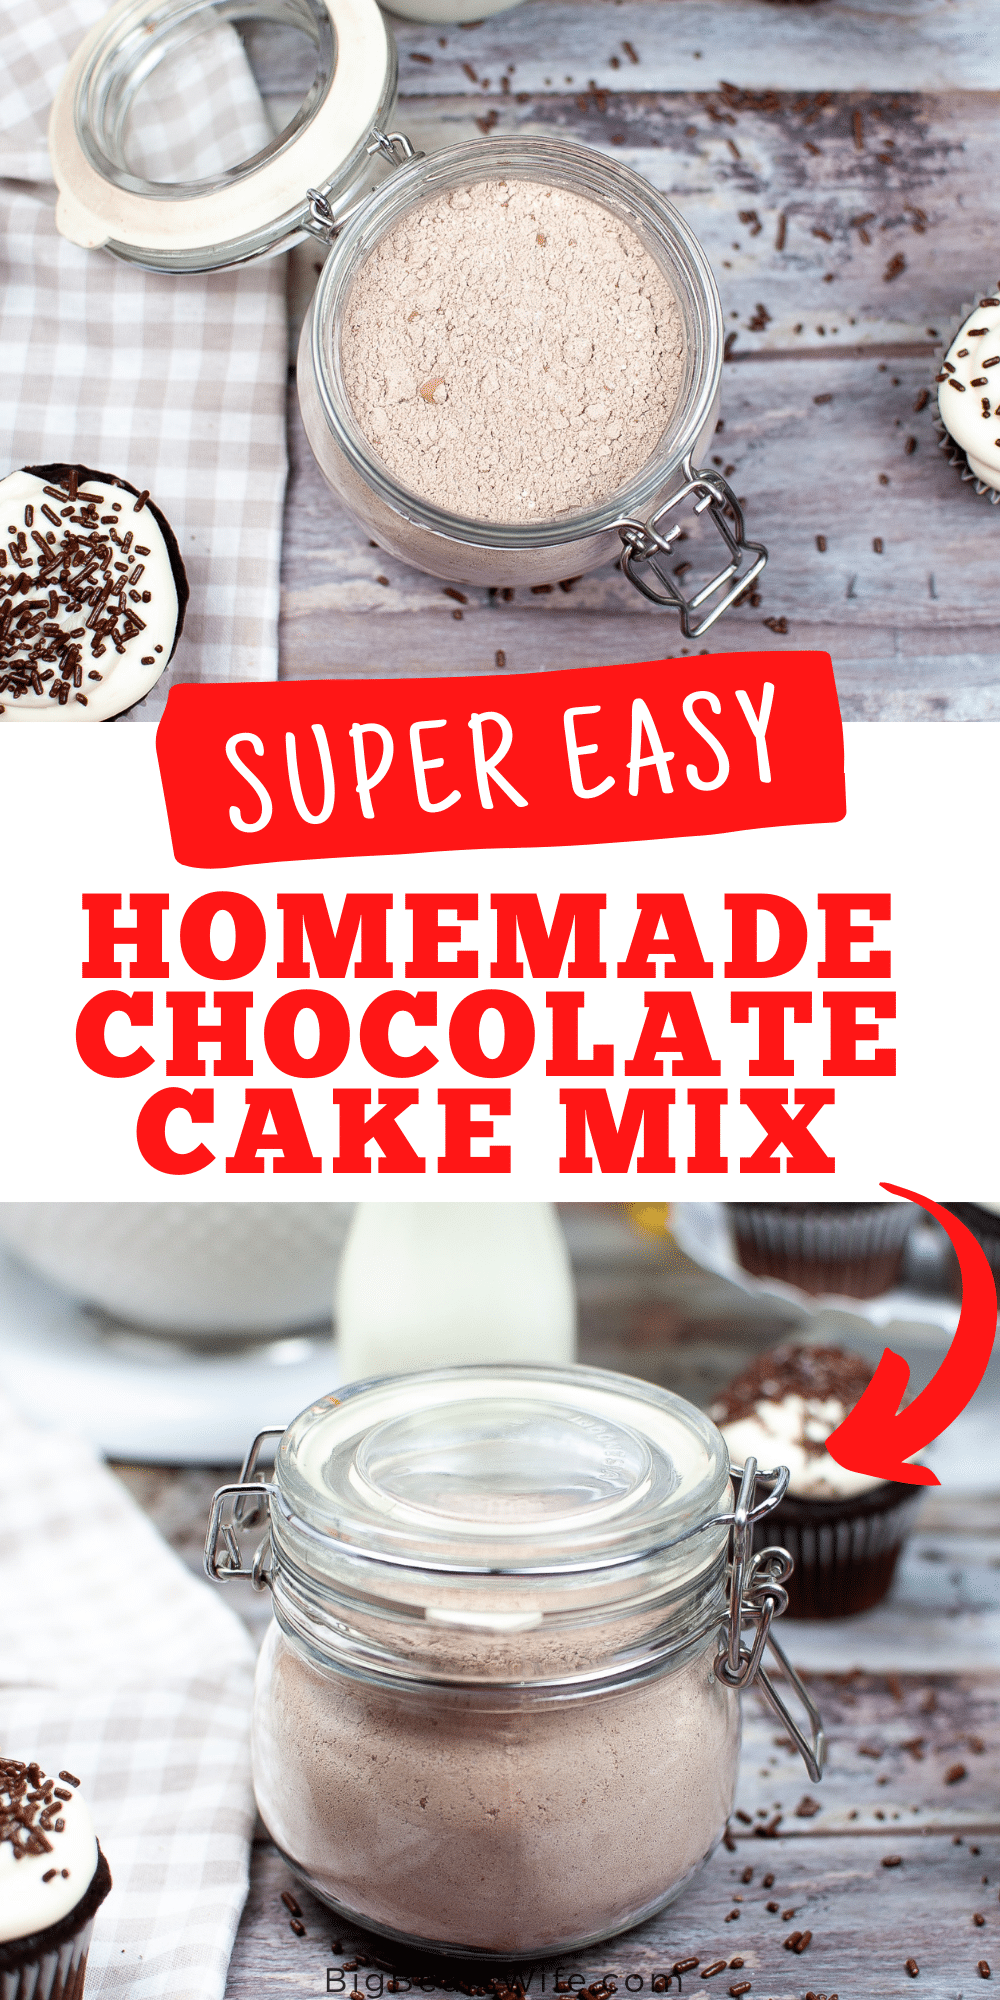 This easy Homemade Chocolate Cake Mix takes 5 minutes to whisk together and it is perfect for keeping on hand in the pantry for those chocolate cupcake cravings or last minute party needs! This mix is just as easy as boxed cake mix but 100% homemade!  via @bigbearswife